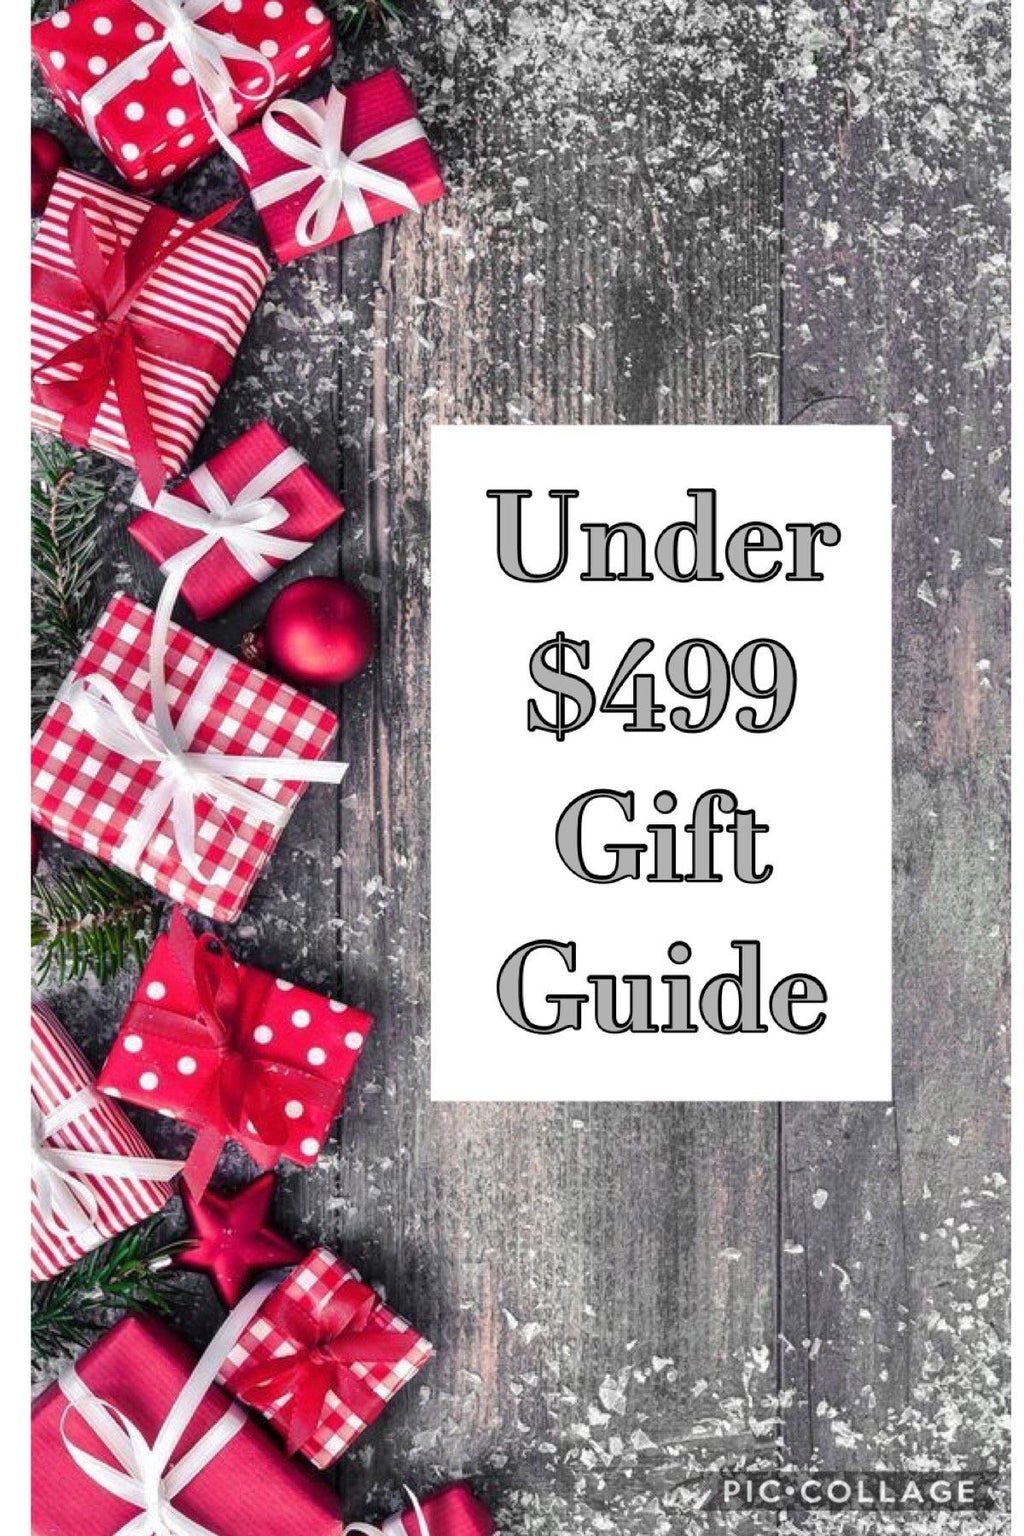 Under $499 Gift Guide